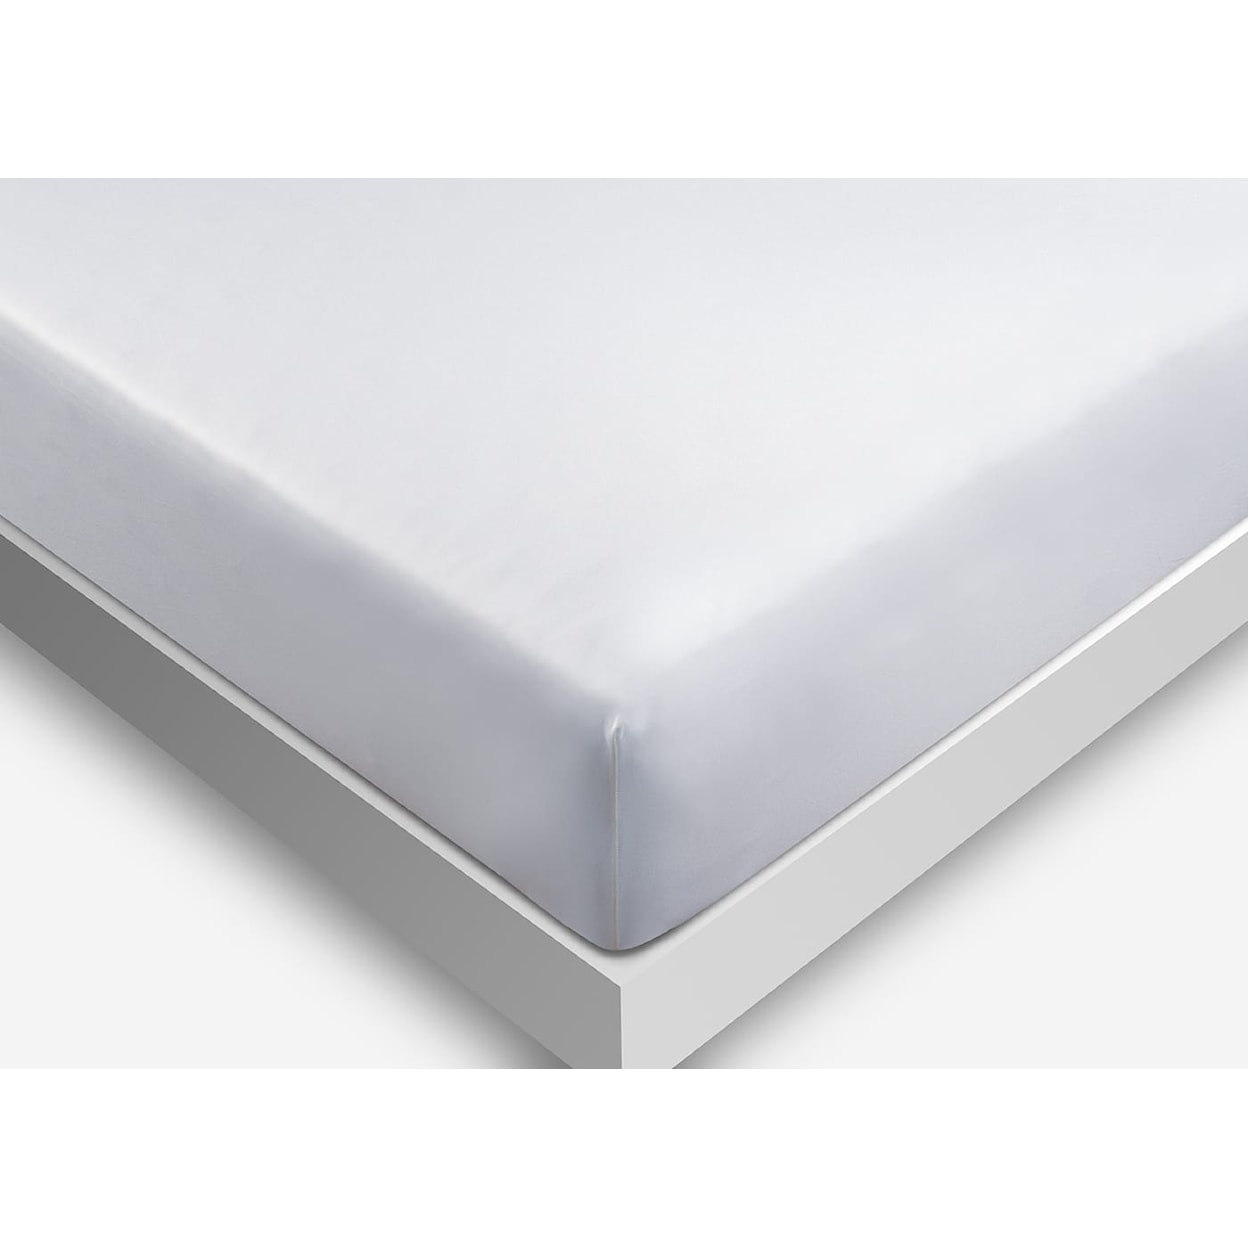 Bedgear Hyper-Cotton Performance Sheets Full Quick Dry Performance Sheets